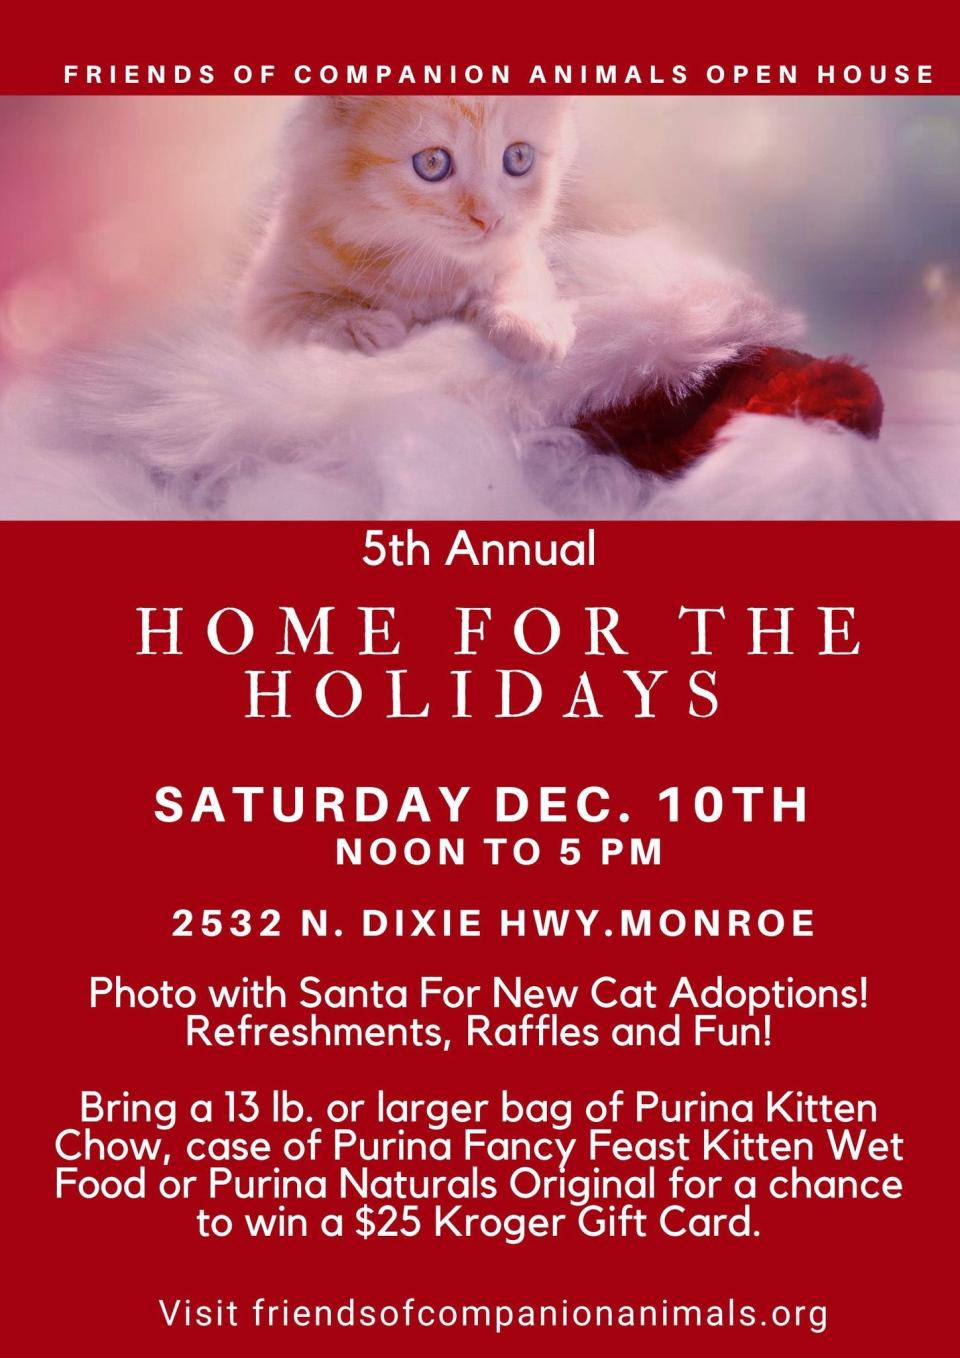 The fifth annual “Home for the Holidays” open house and Christmas Bazaar will take place from noon to 5 p.m. Saturday, Dec. 10, at Friends of Companion Animals, 2532 N. Dixie Highway.